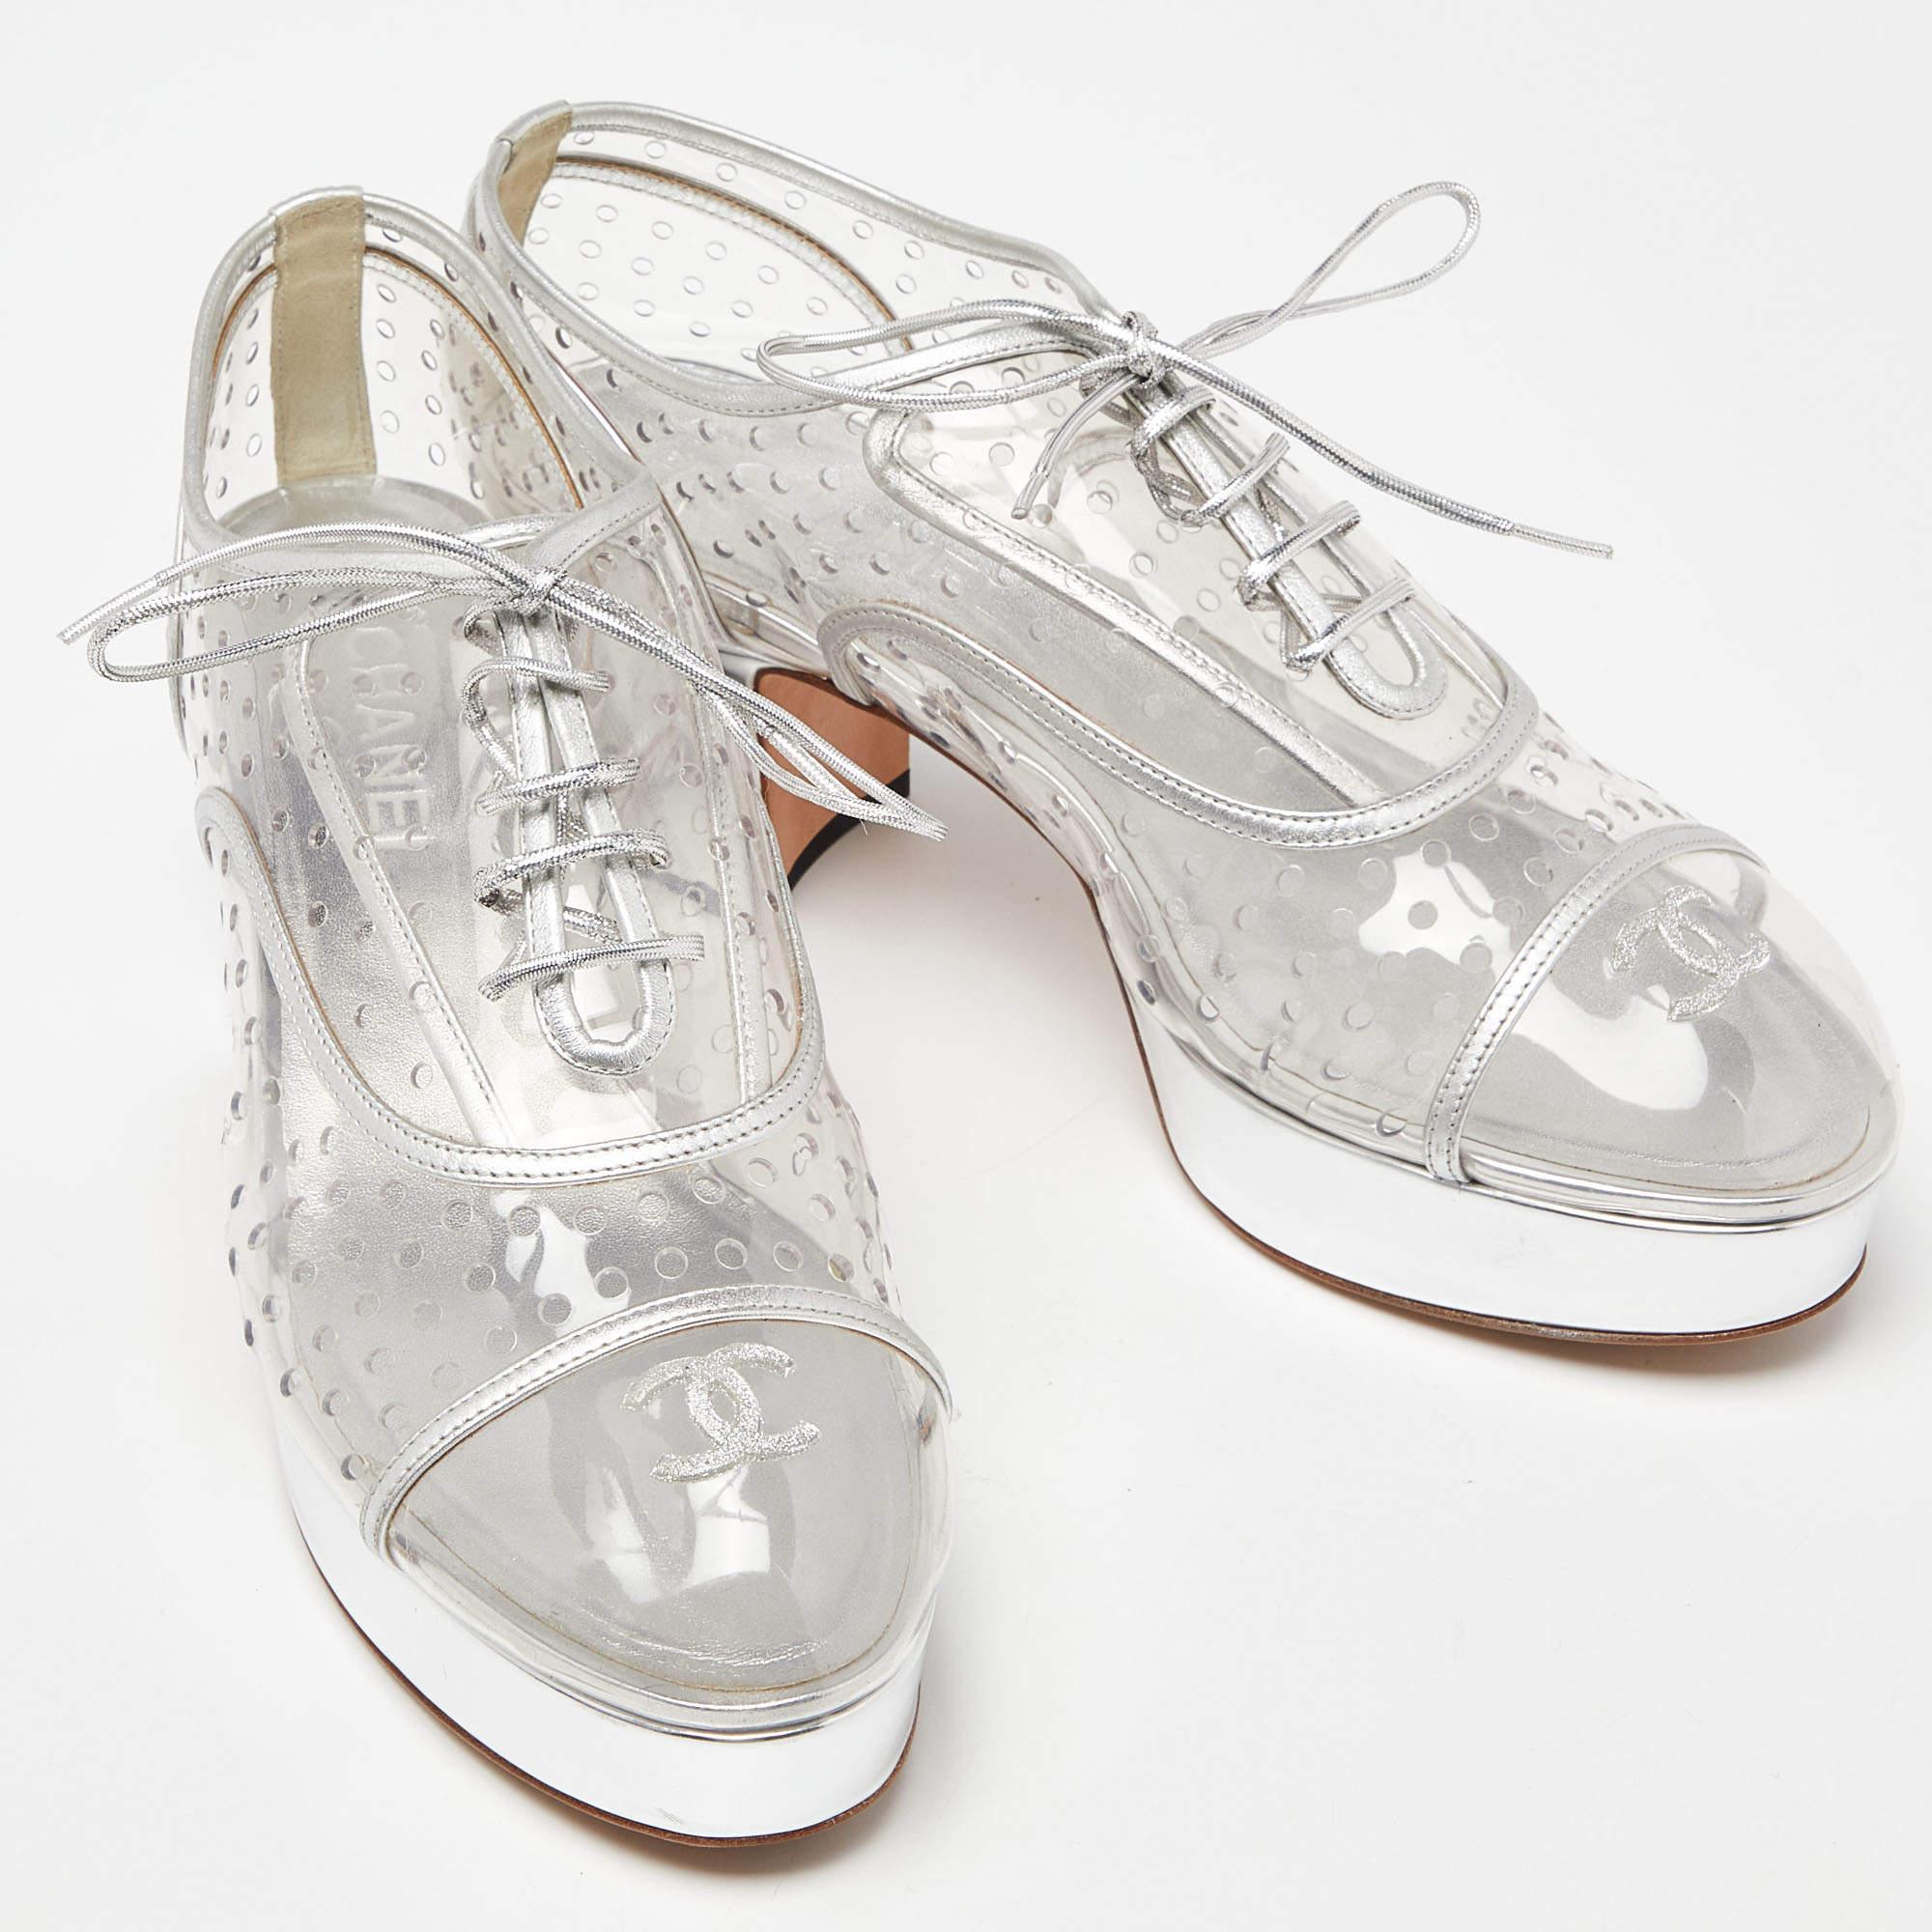 Chanel Transparent/Silver Pvc and Leather CC Block Heel Lace Up Platform Size 41 In Good Condition For Sale In Dubai, Al Qouz 2